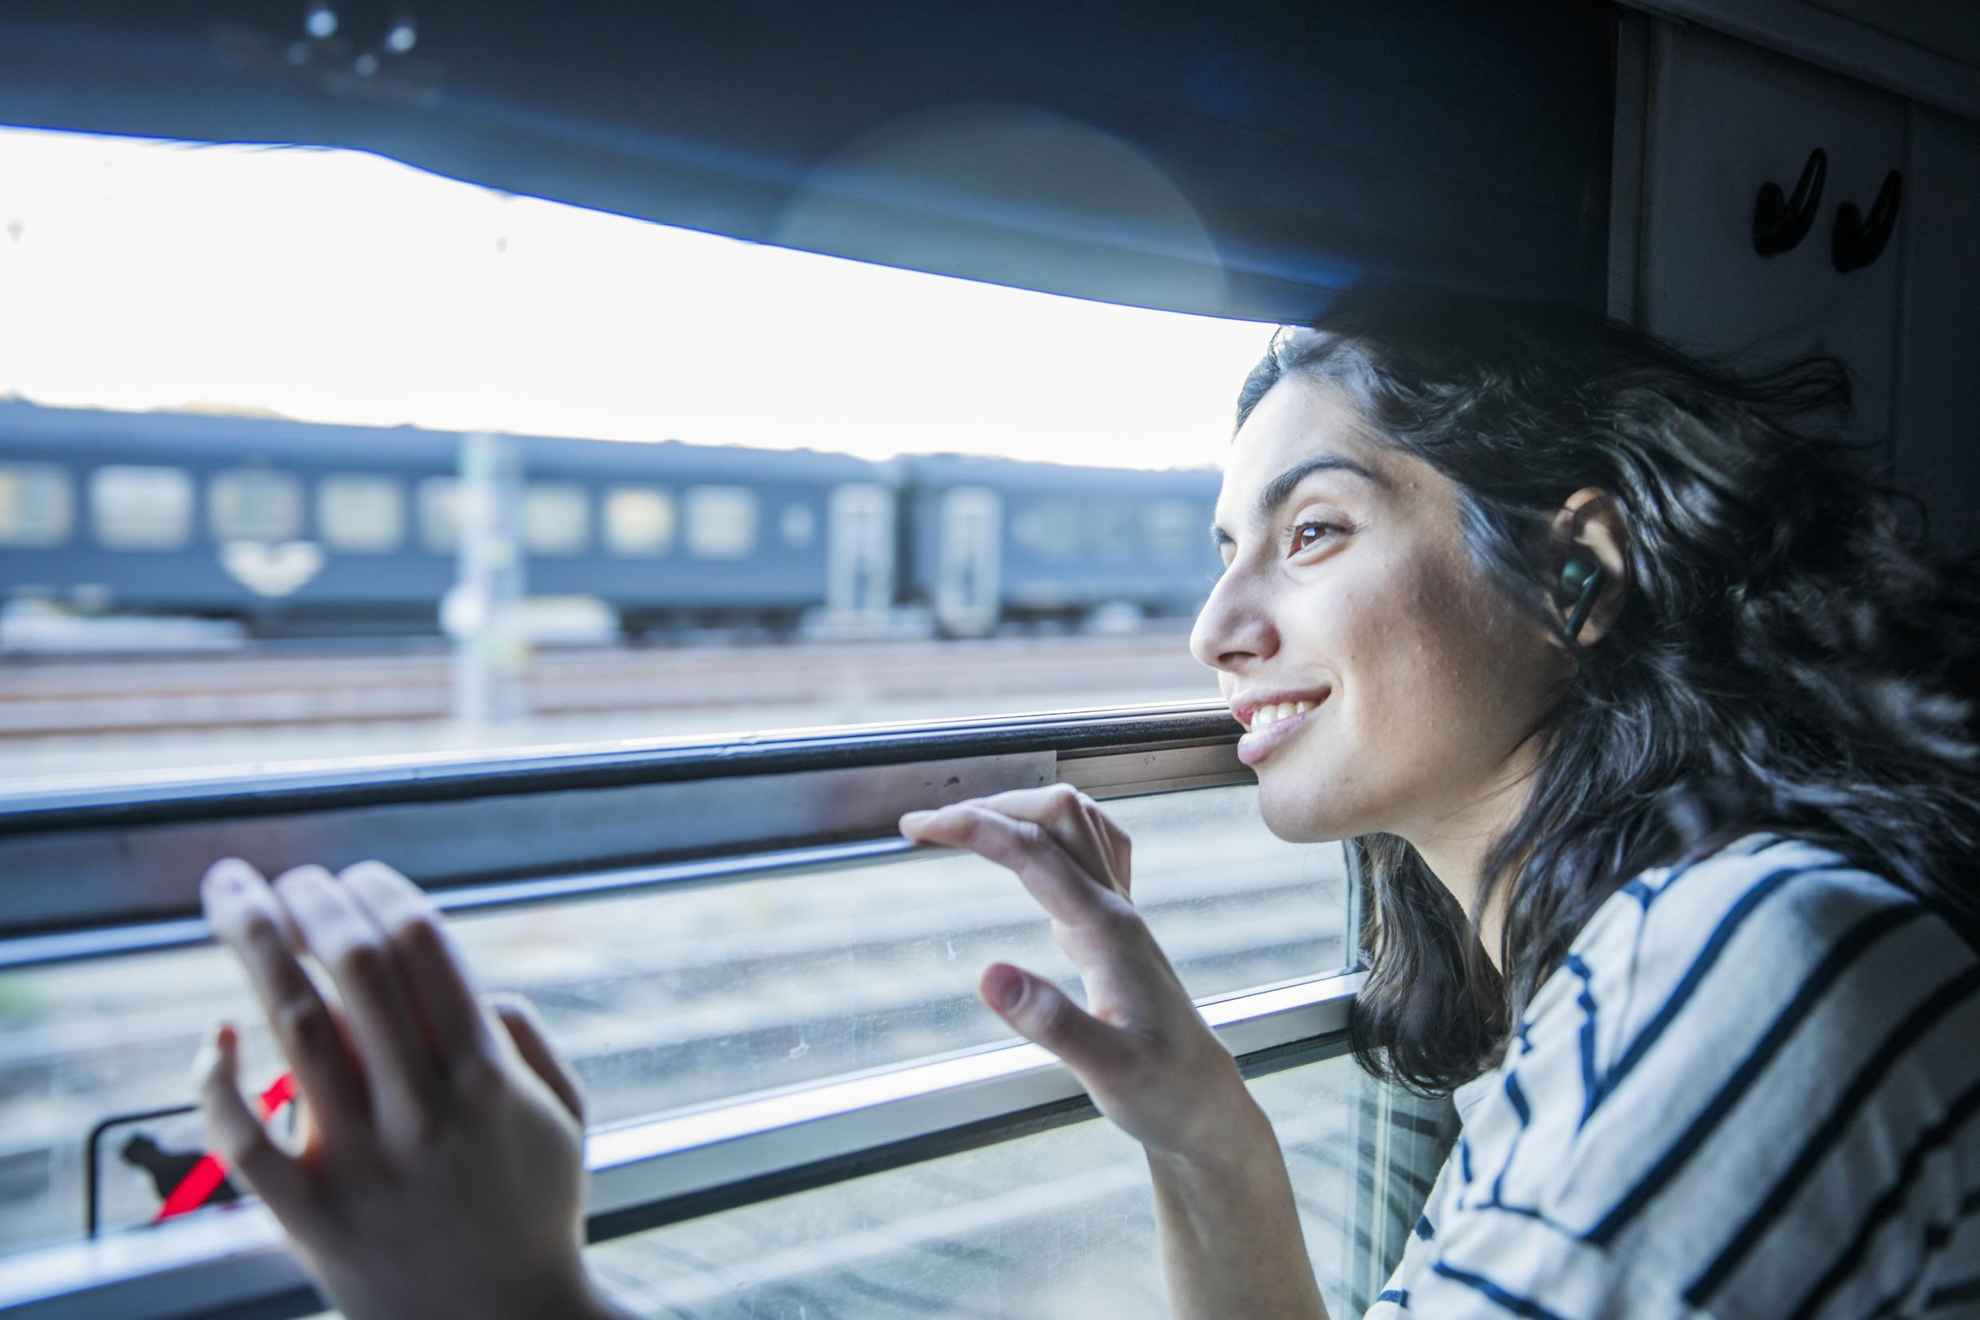 A woman is looking out of the window on a train that are passing another train.